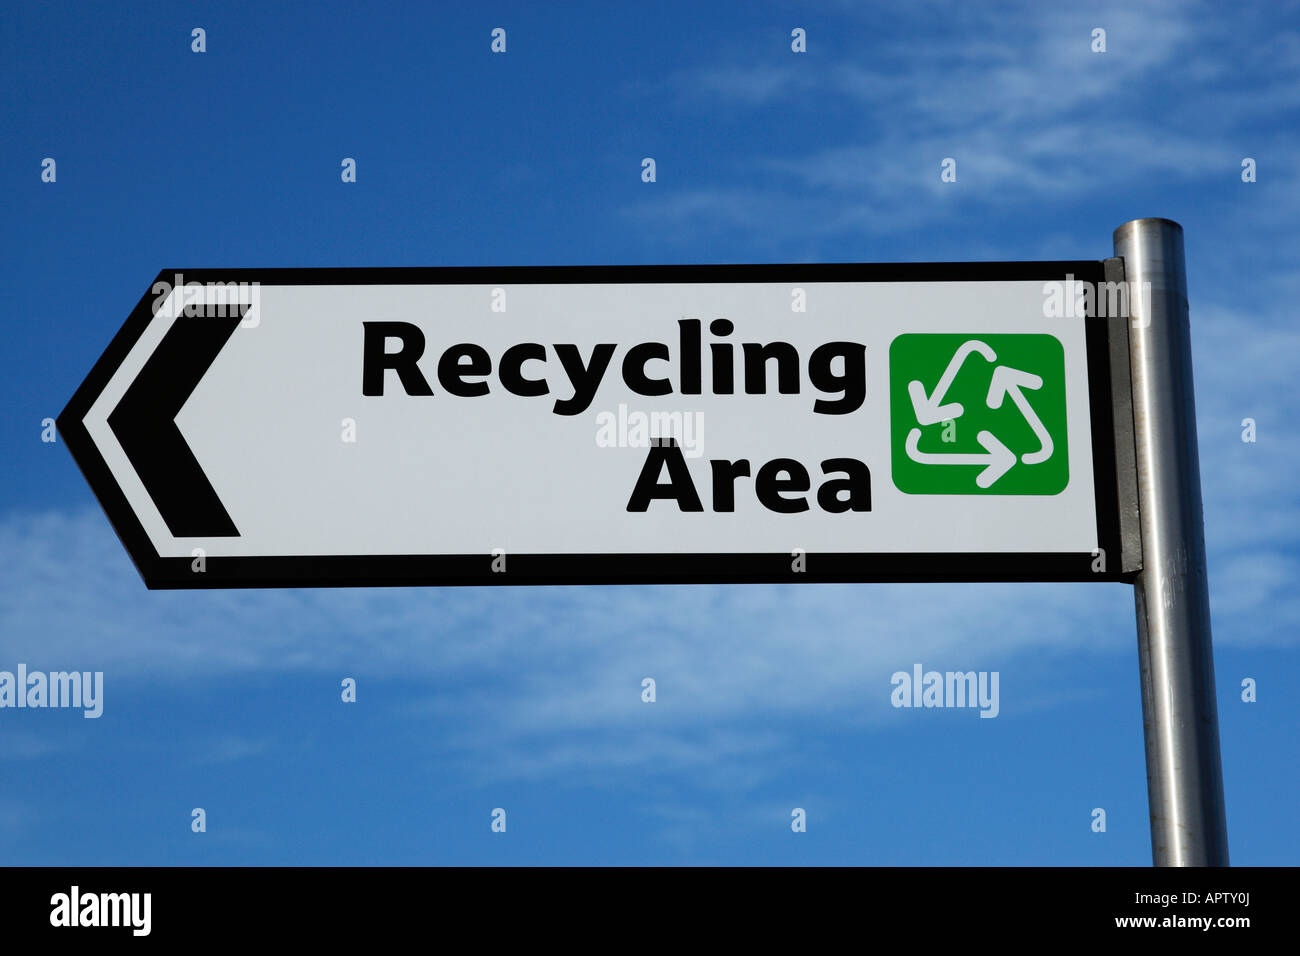 Recycling-Bereich Zeichen Bedworth Coventry England uk Stockfoto